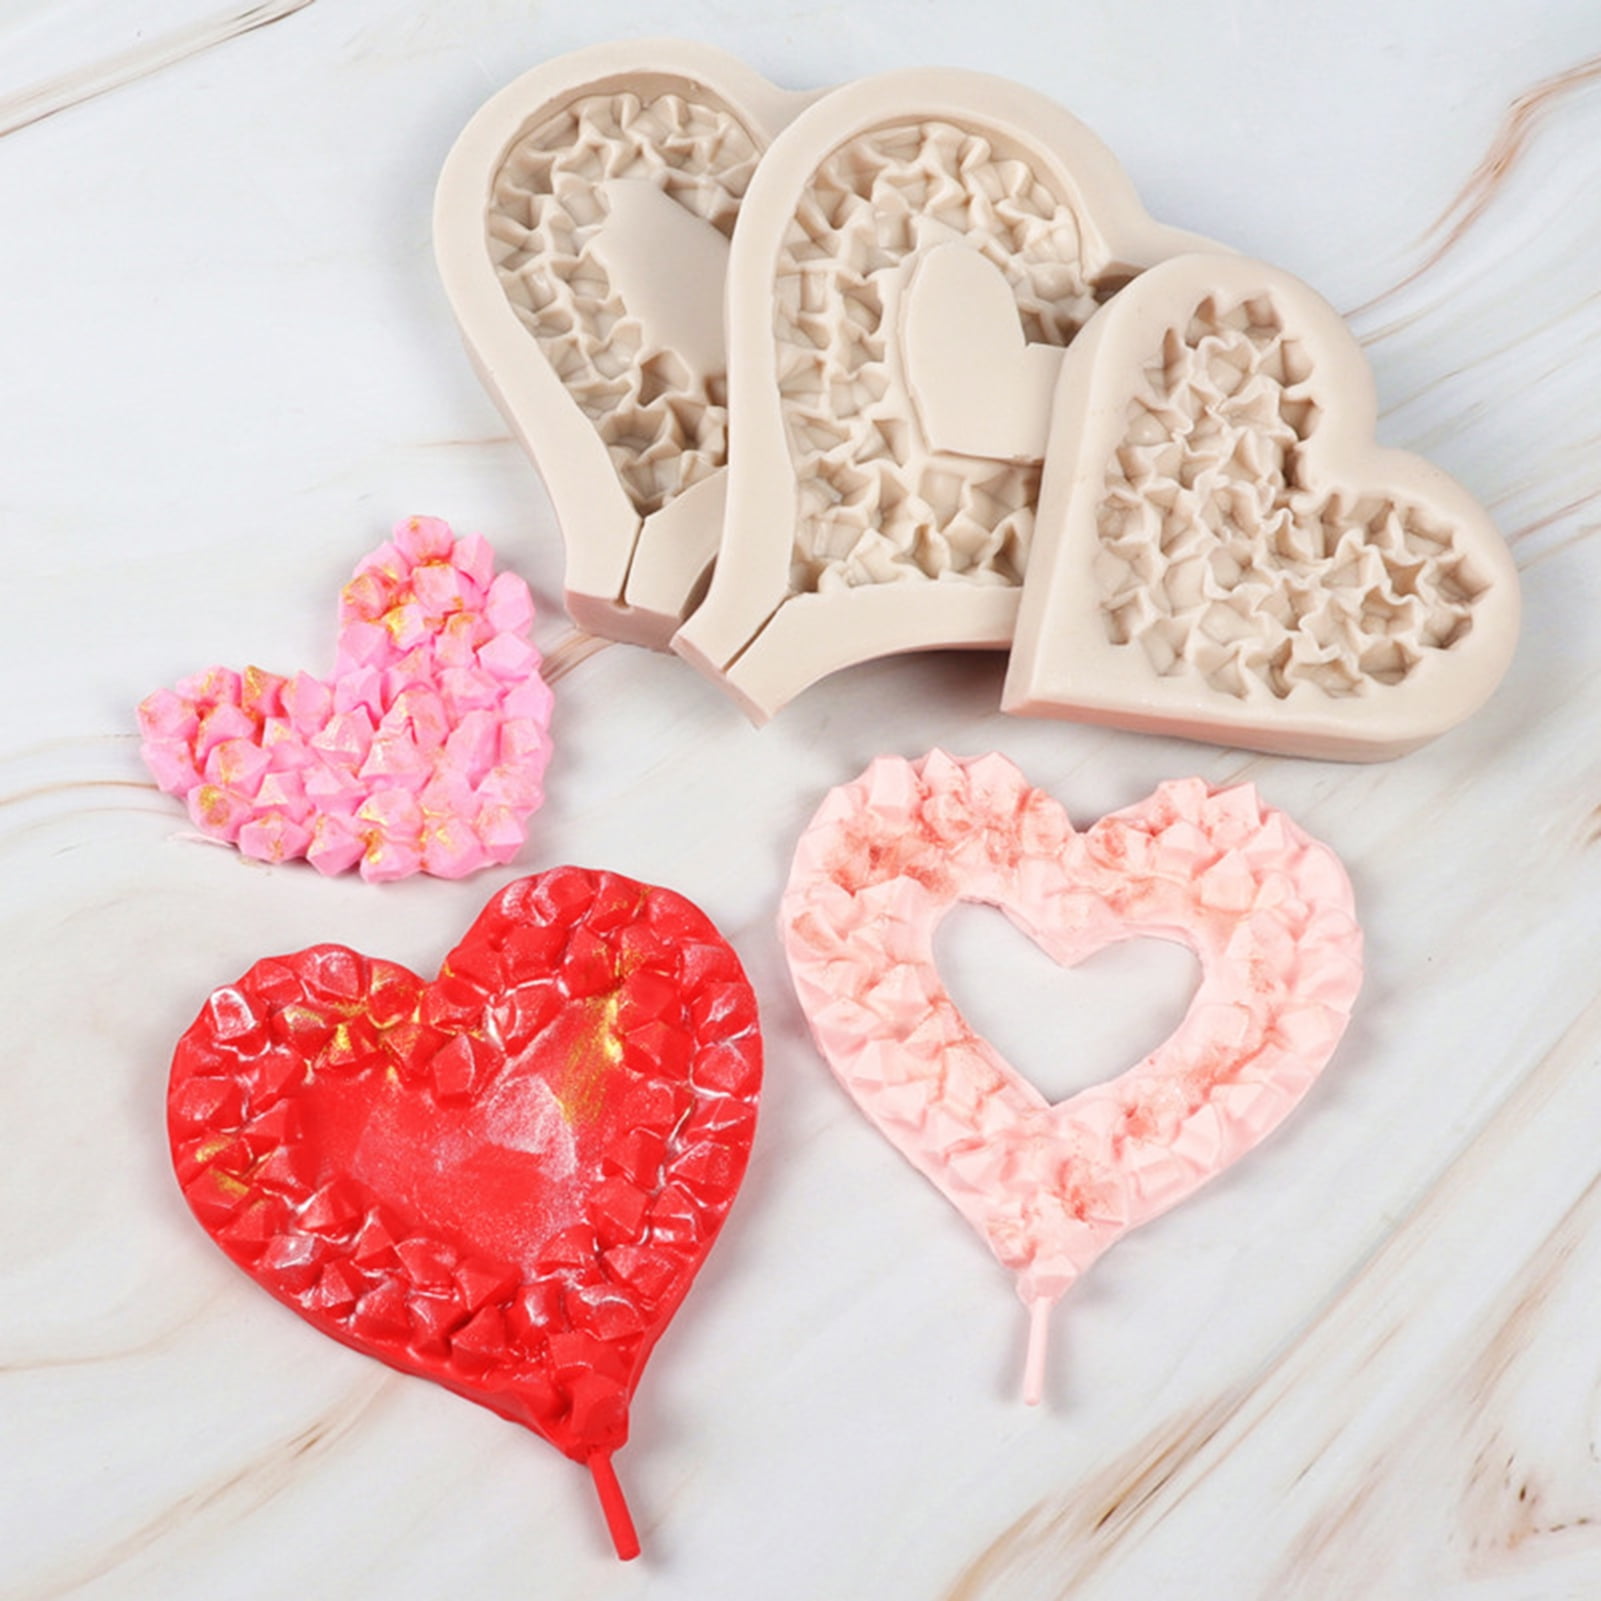 3D Love Heart Chocolate Fondant Mold Silicone Cake Sugar Decorating Craft Mould 